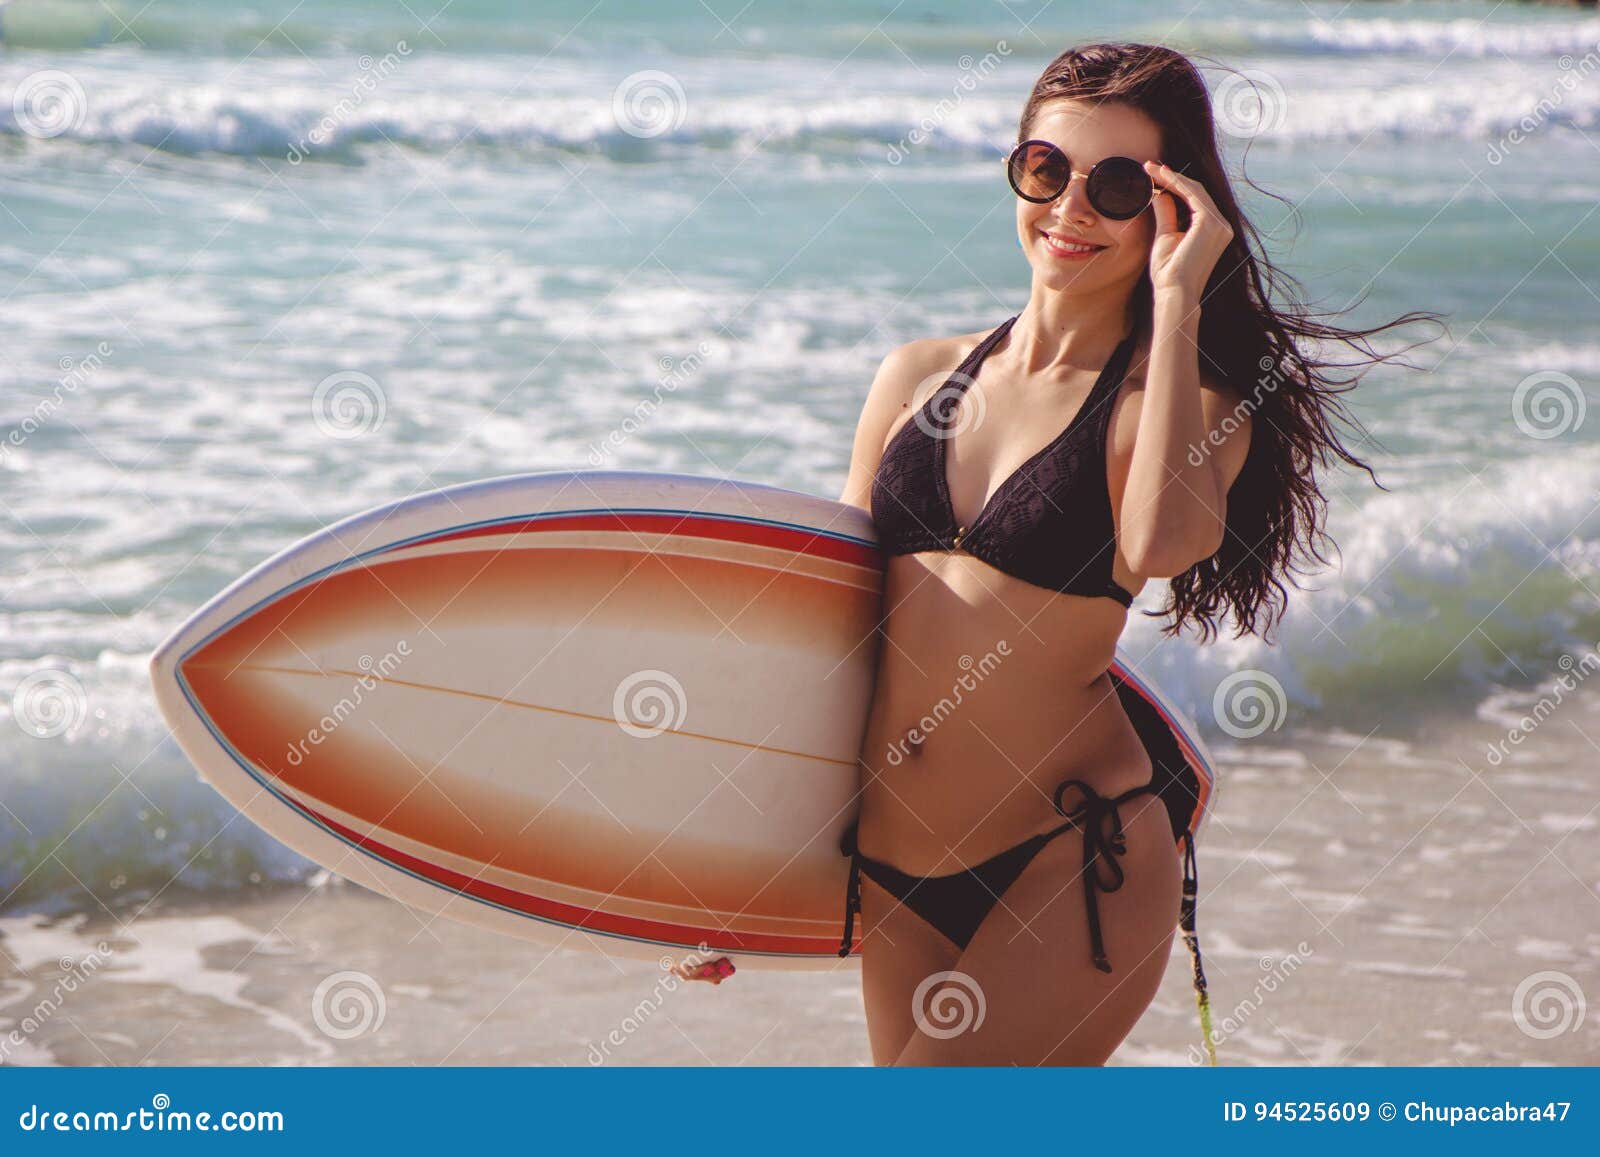 Beautiful Surfer Brunette Girl On The Beach At Sunset Time